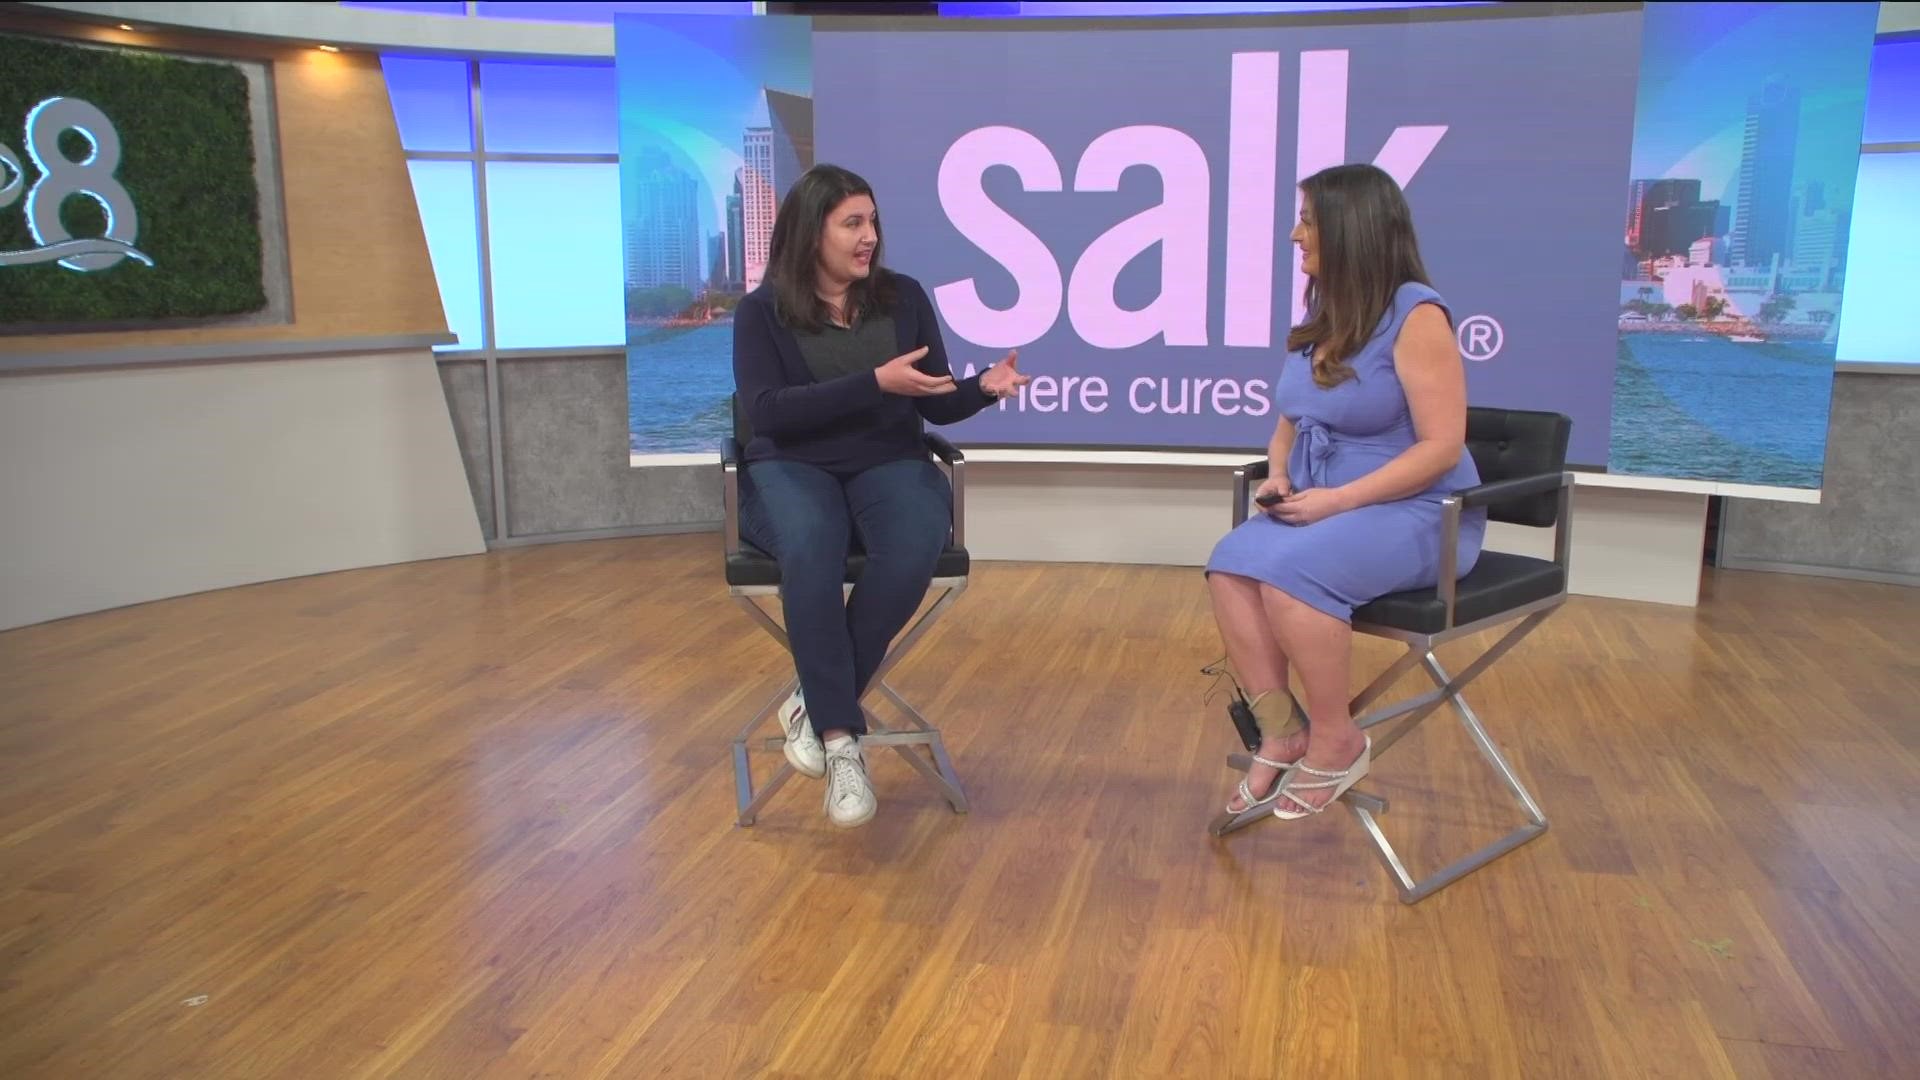 Dr. Emily Manoogian from Salk Institute talked about time restricted eating and how it can help your health and circadian rhythm.